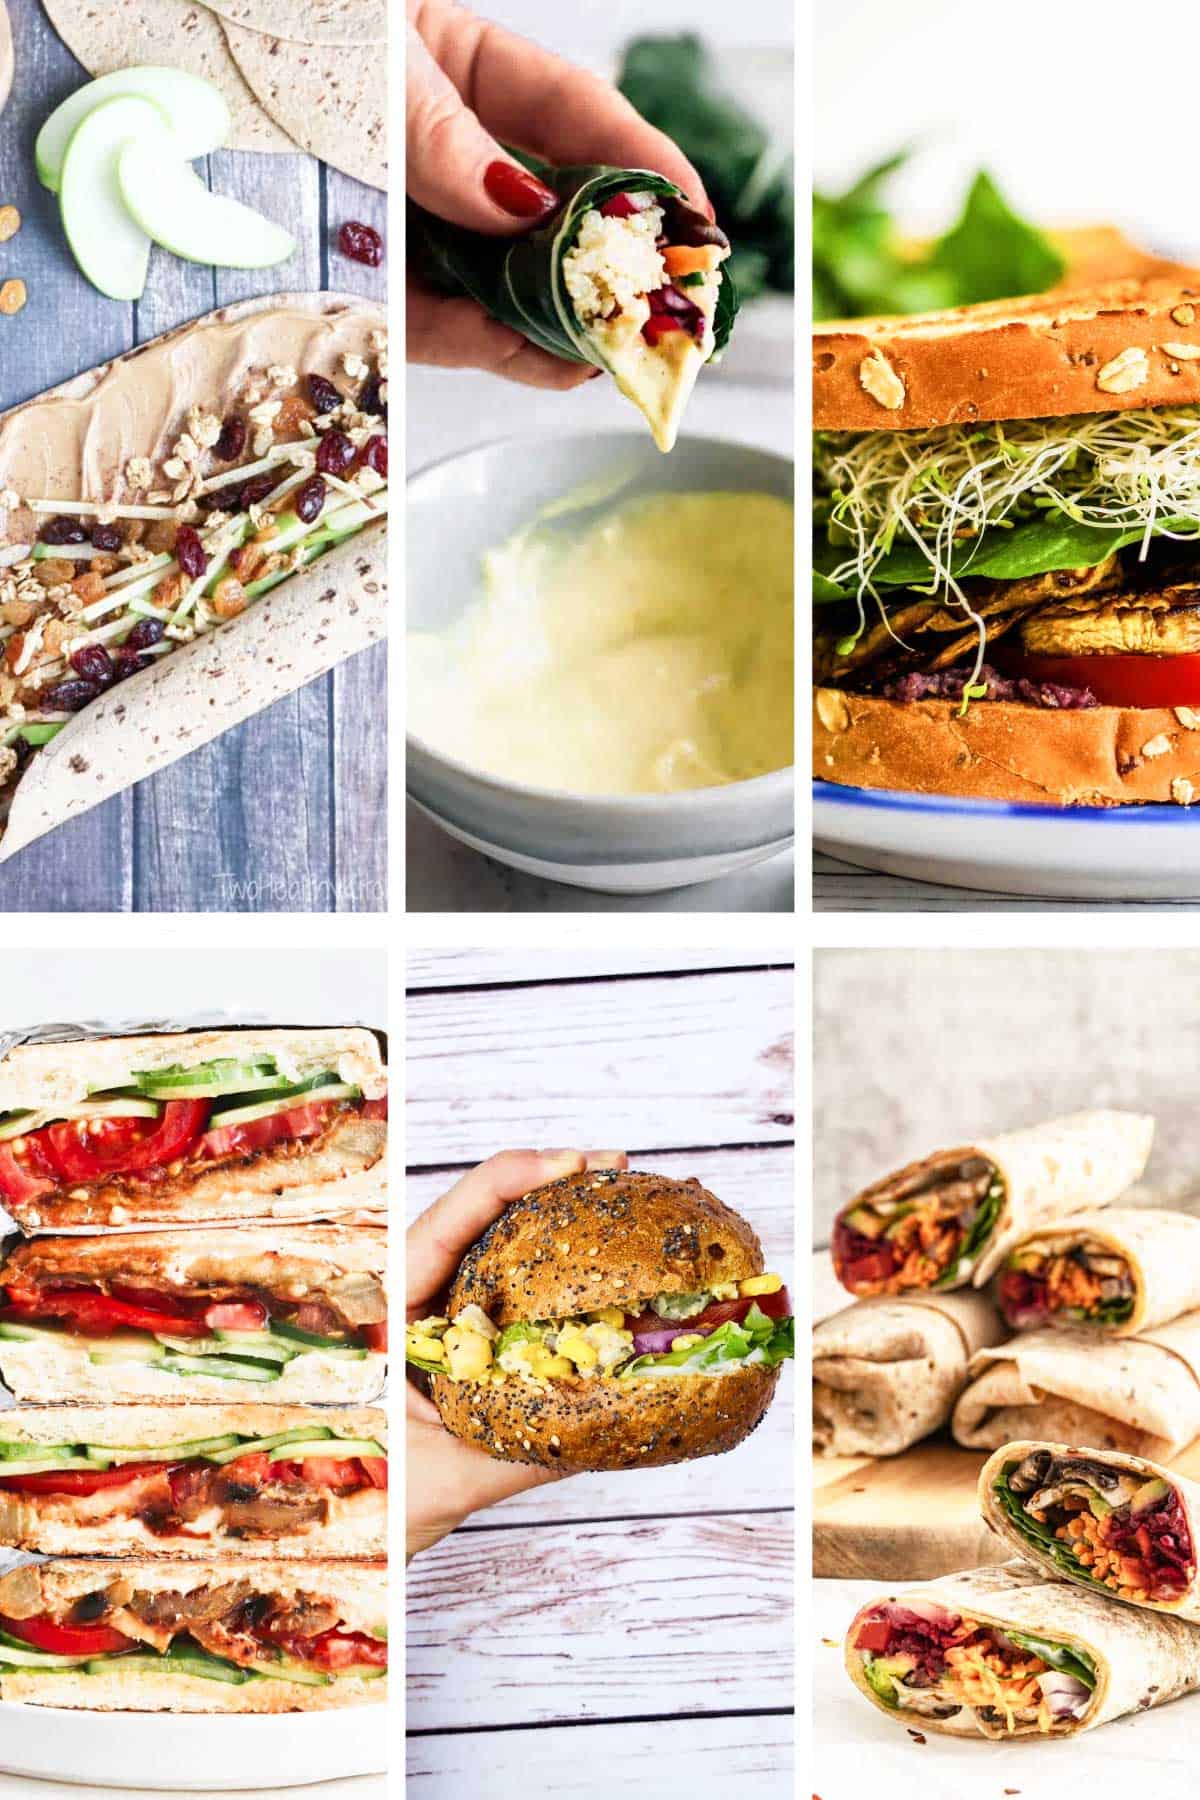 Assortment of six images showcasing various vegan wraps and vegan sandwiches with diverse fillings, including vegetables, sauces, and cheeses.